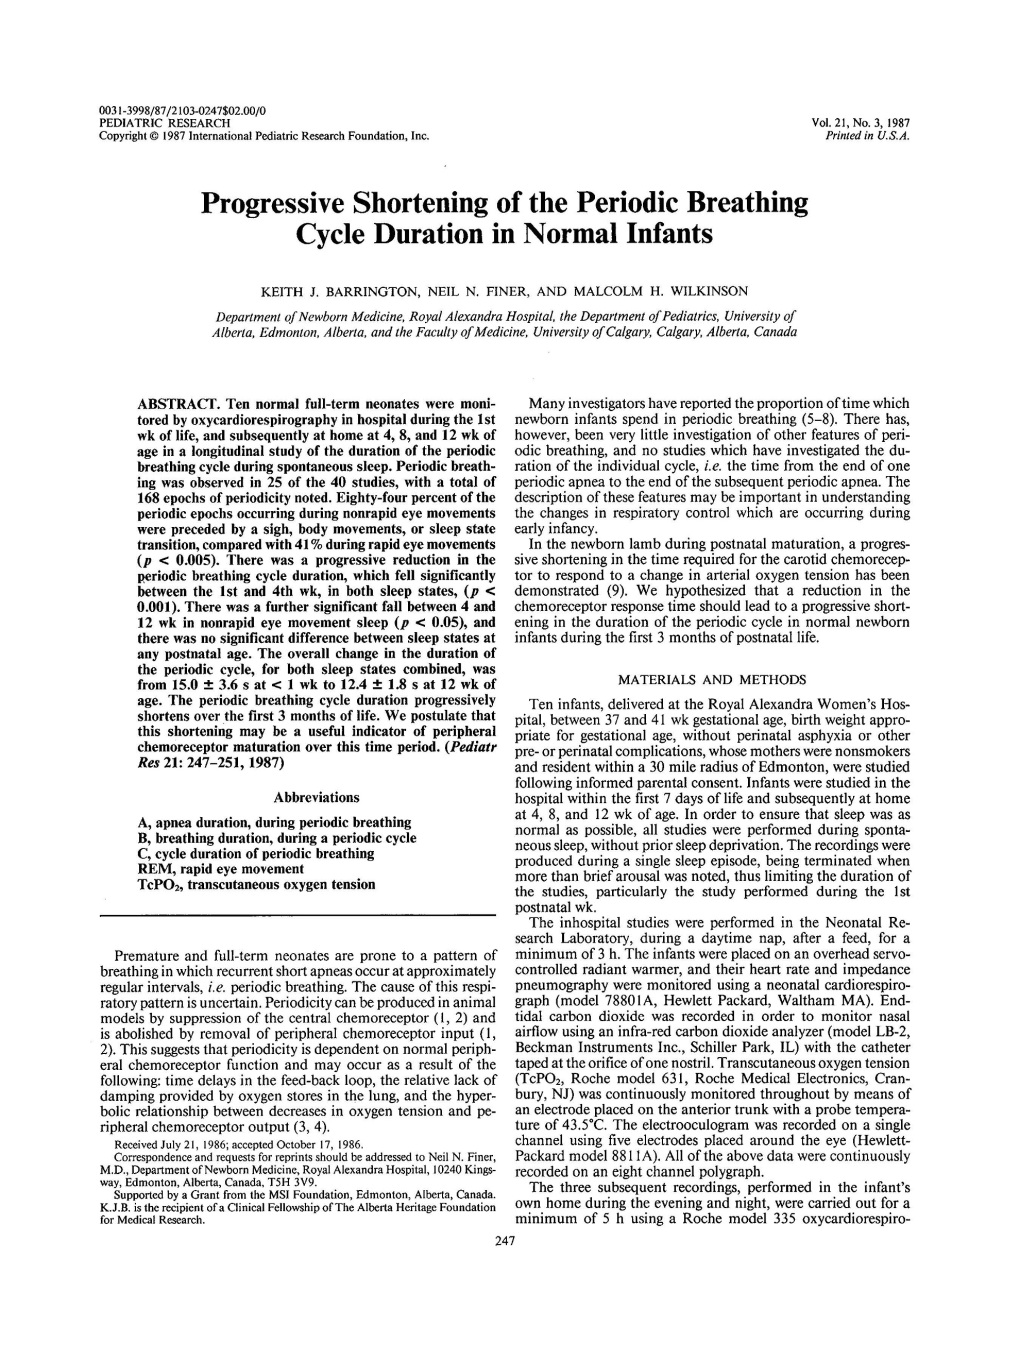 Progressive Shortening of the Periodic Breathing Cycle Duration in Normal Infants